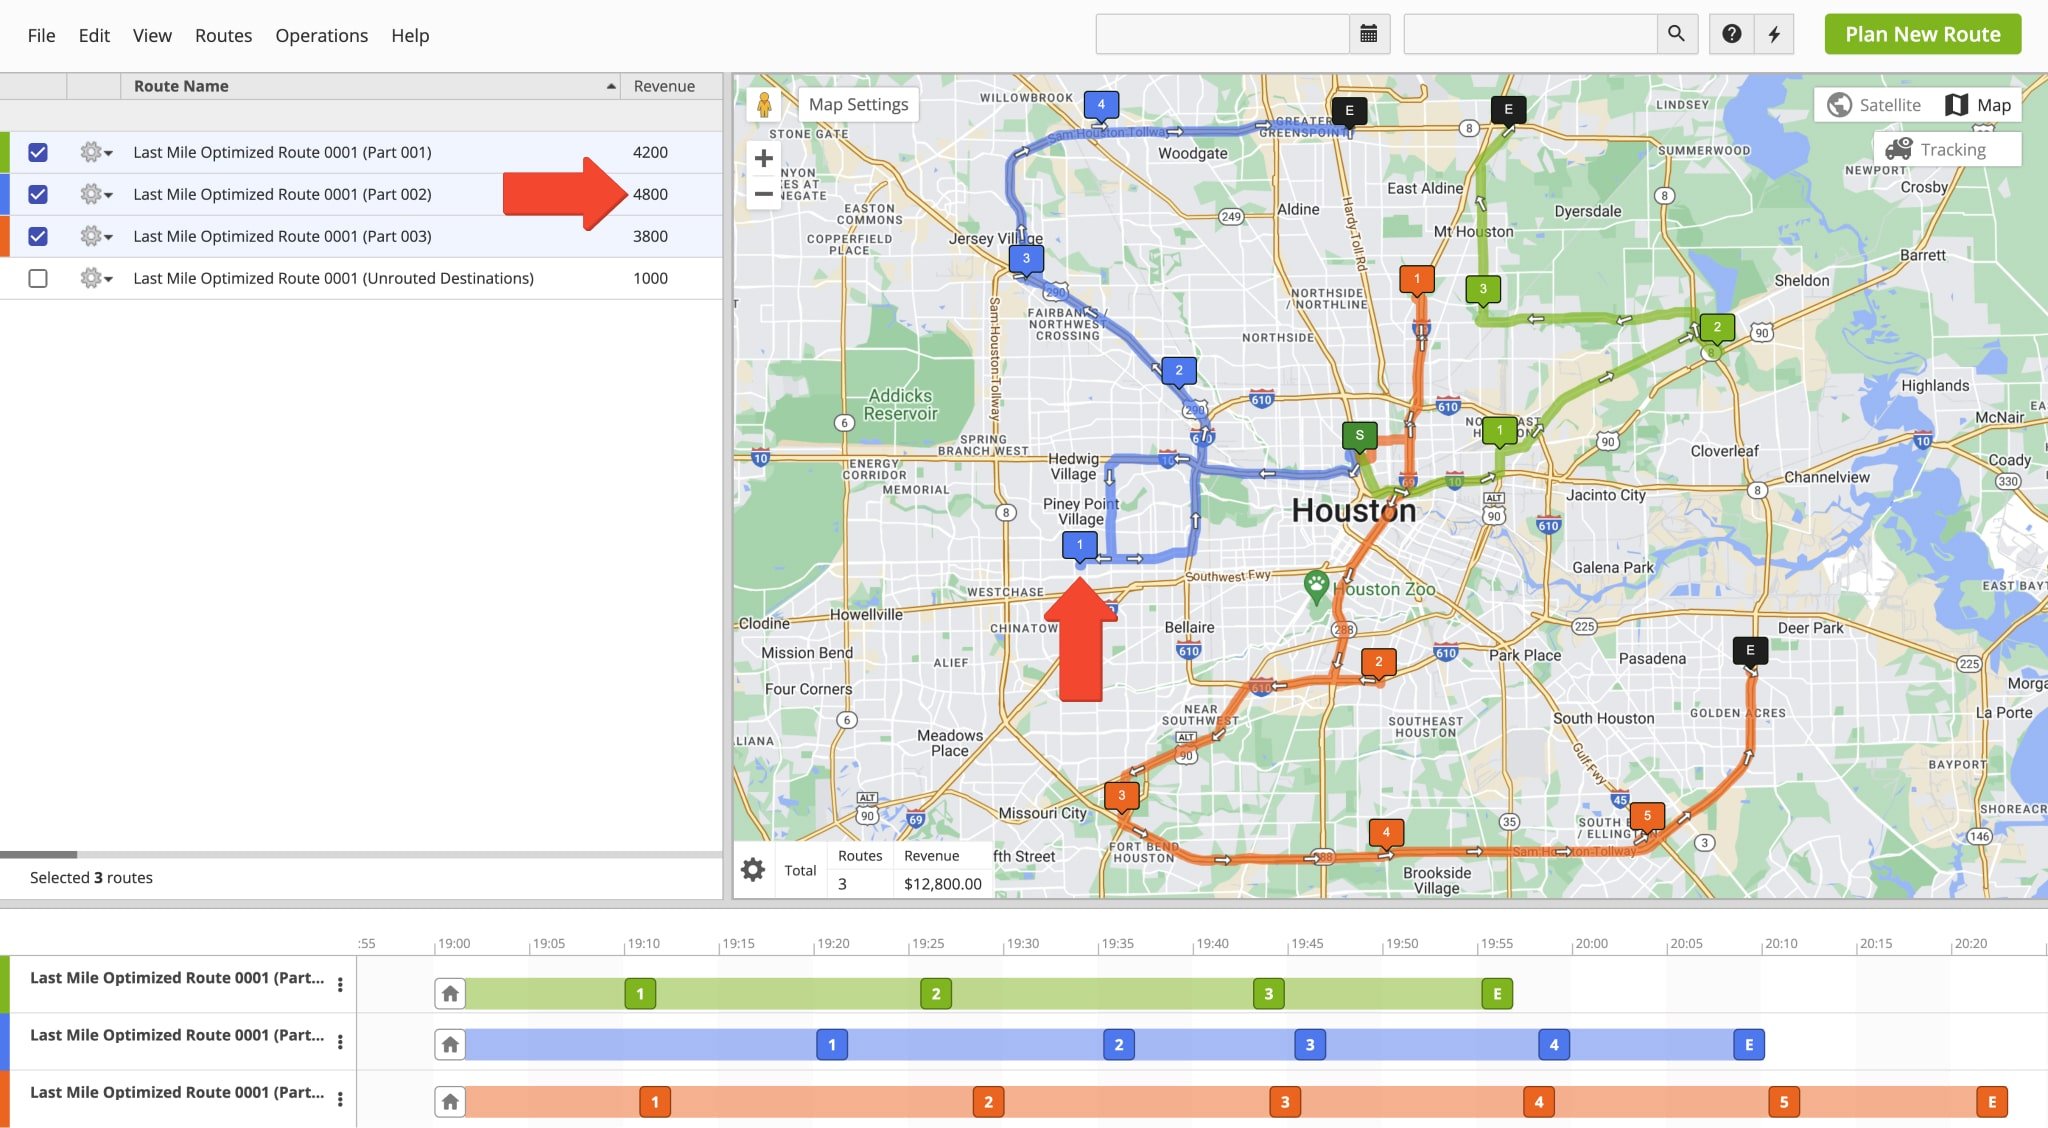 Adding unrouted destinations to routes may lead to those routes exceeding your constraint settings.